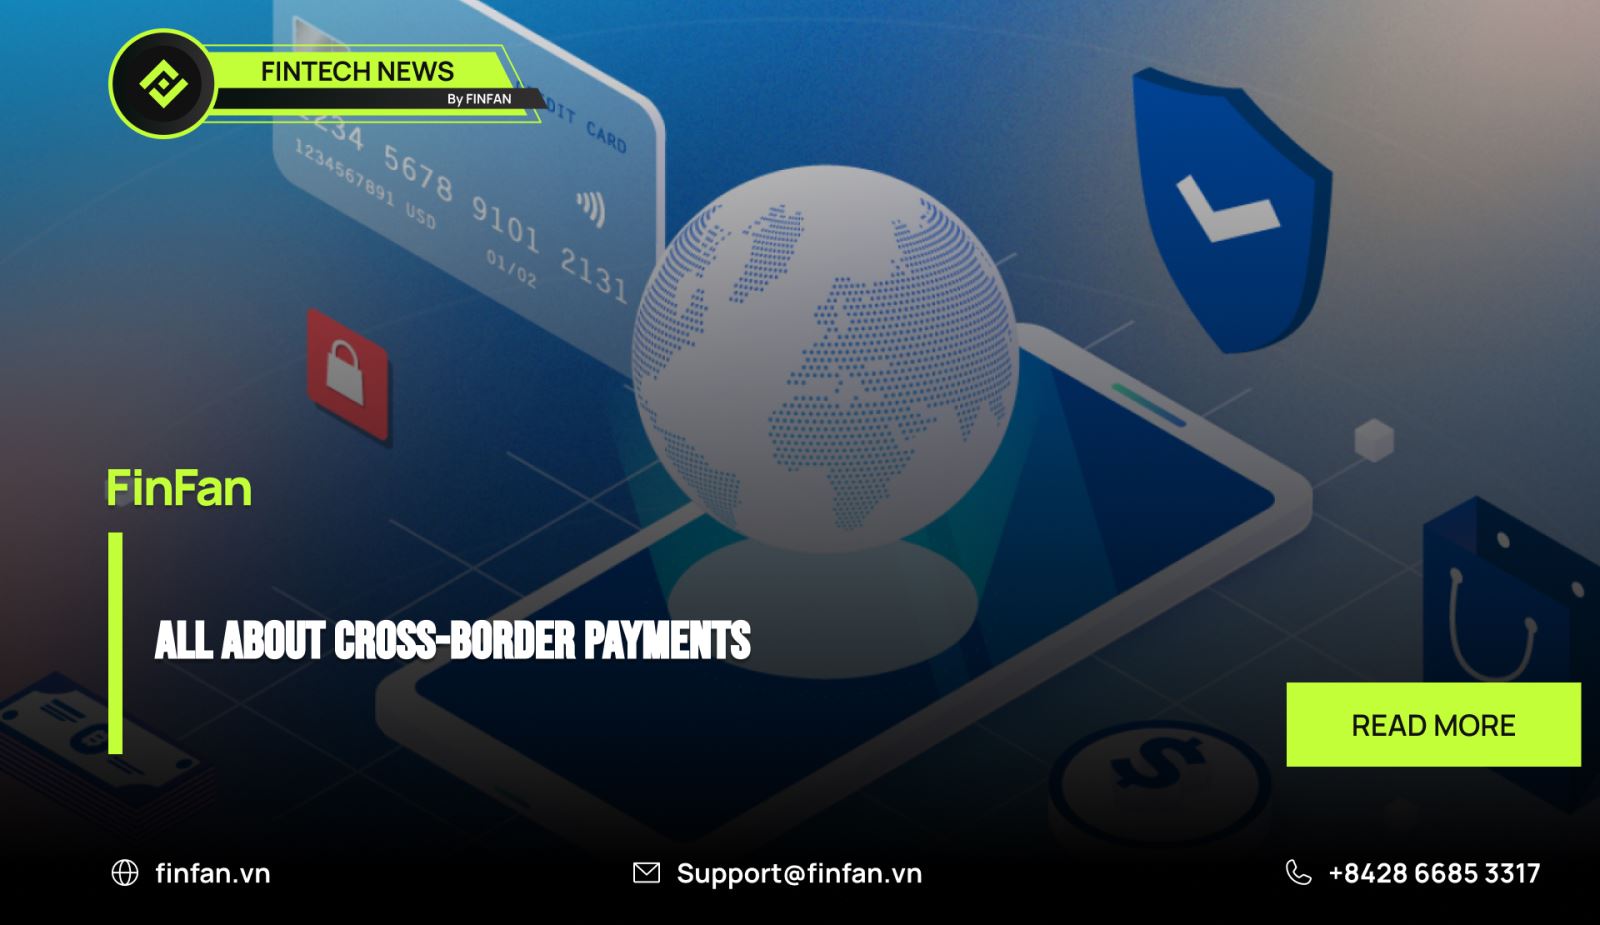 All about cross-border payments